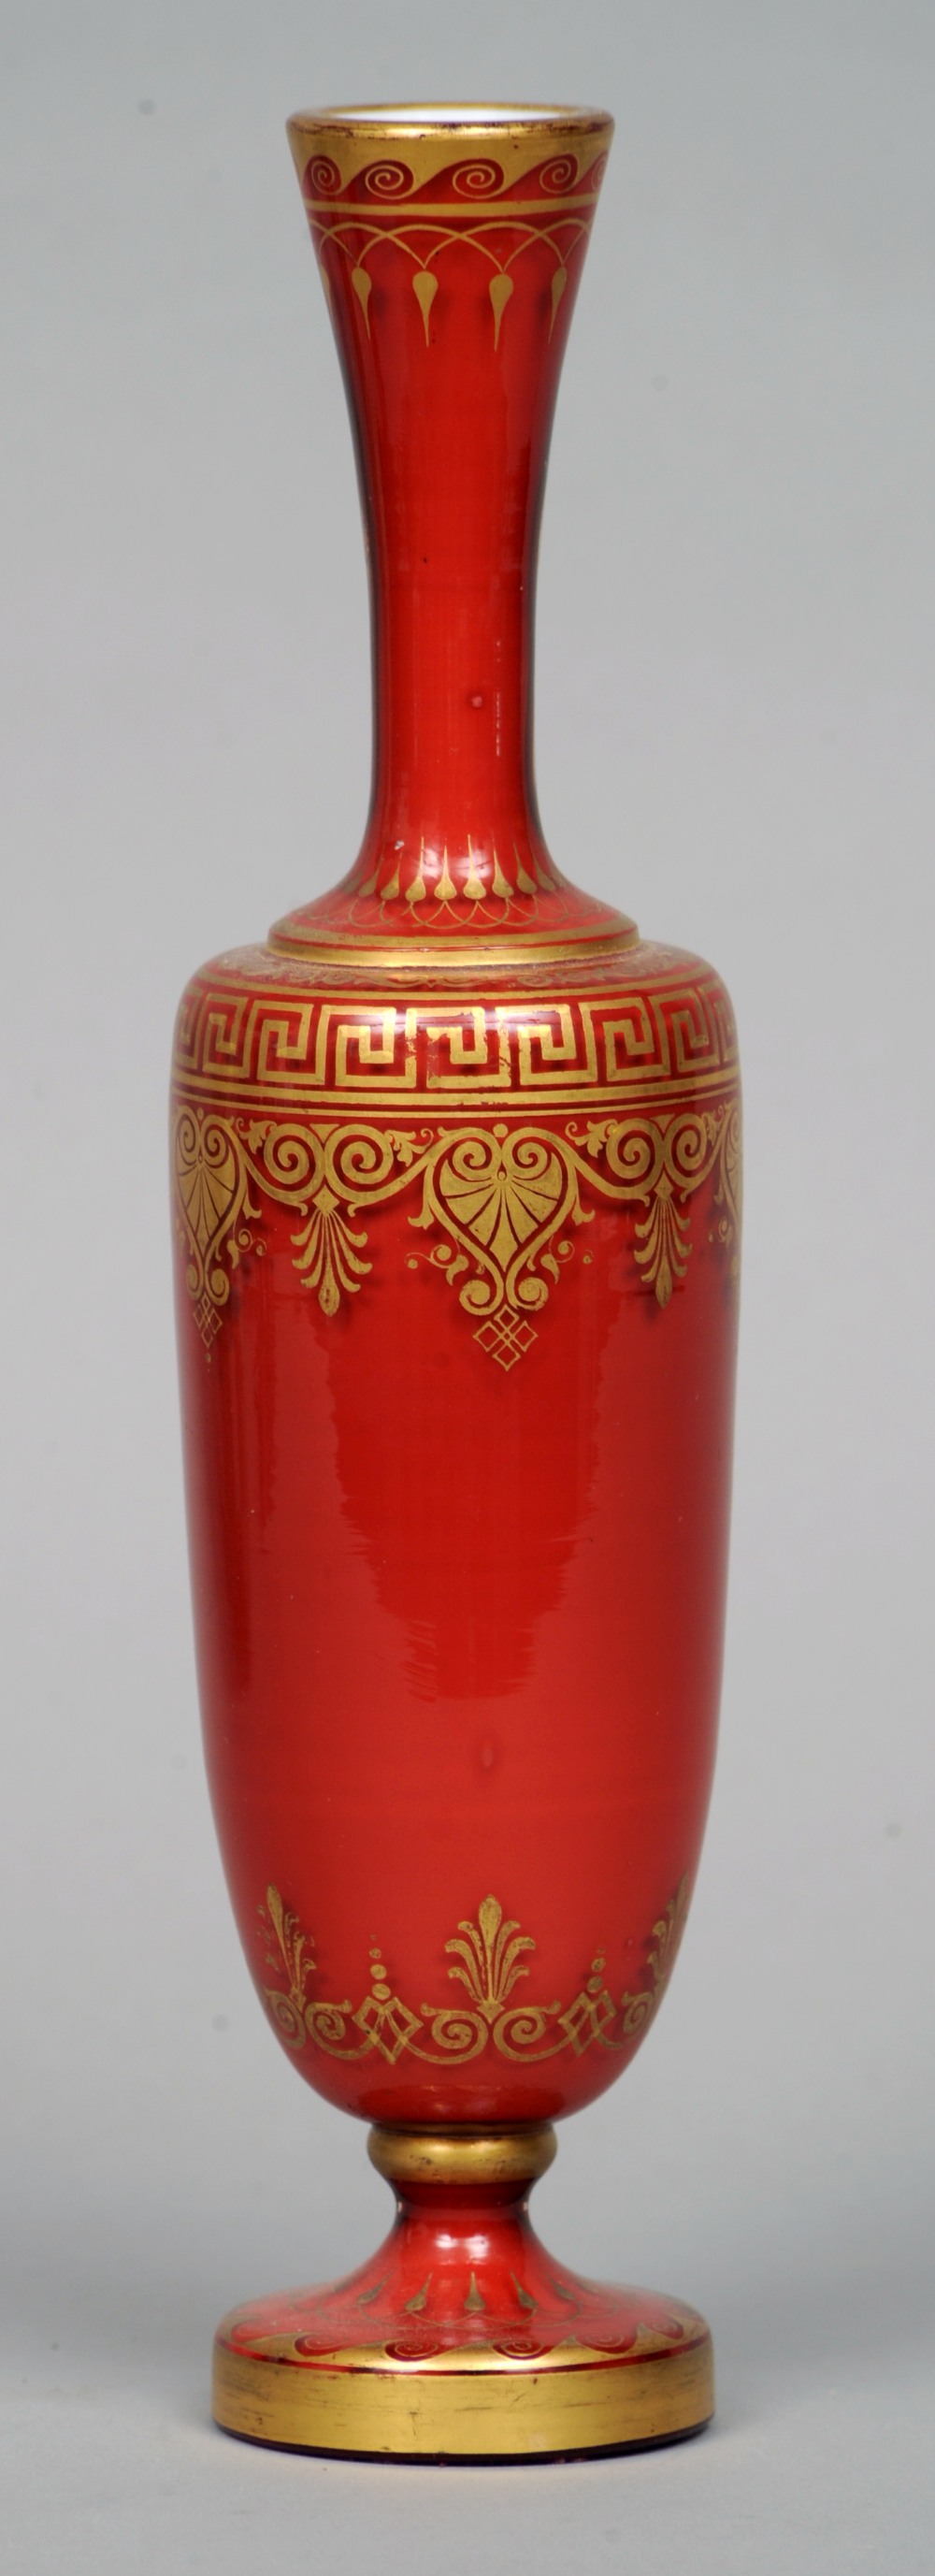 A 19th century Continental clear cased red glass vase
The tall neck, slender body and spreading foot